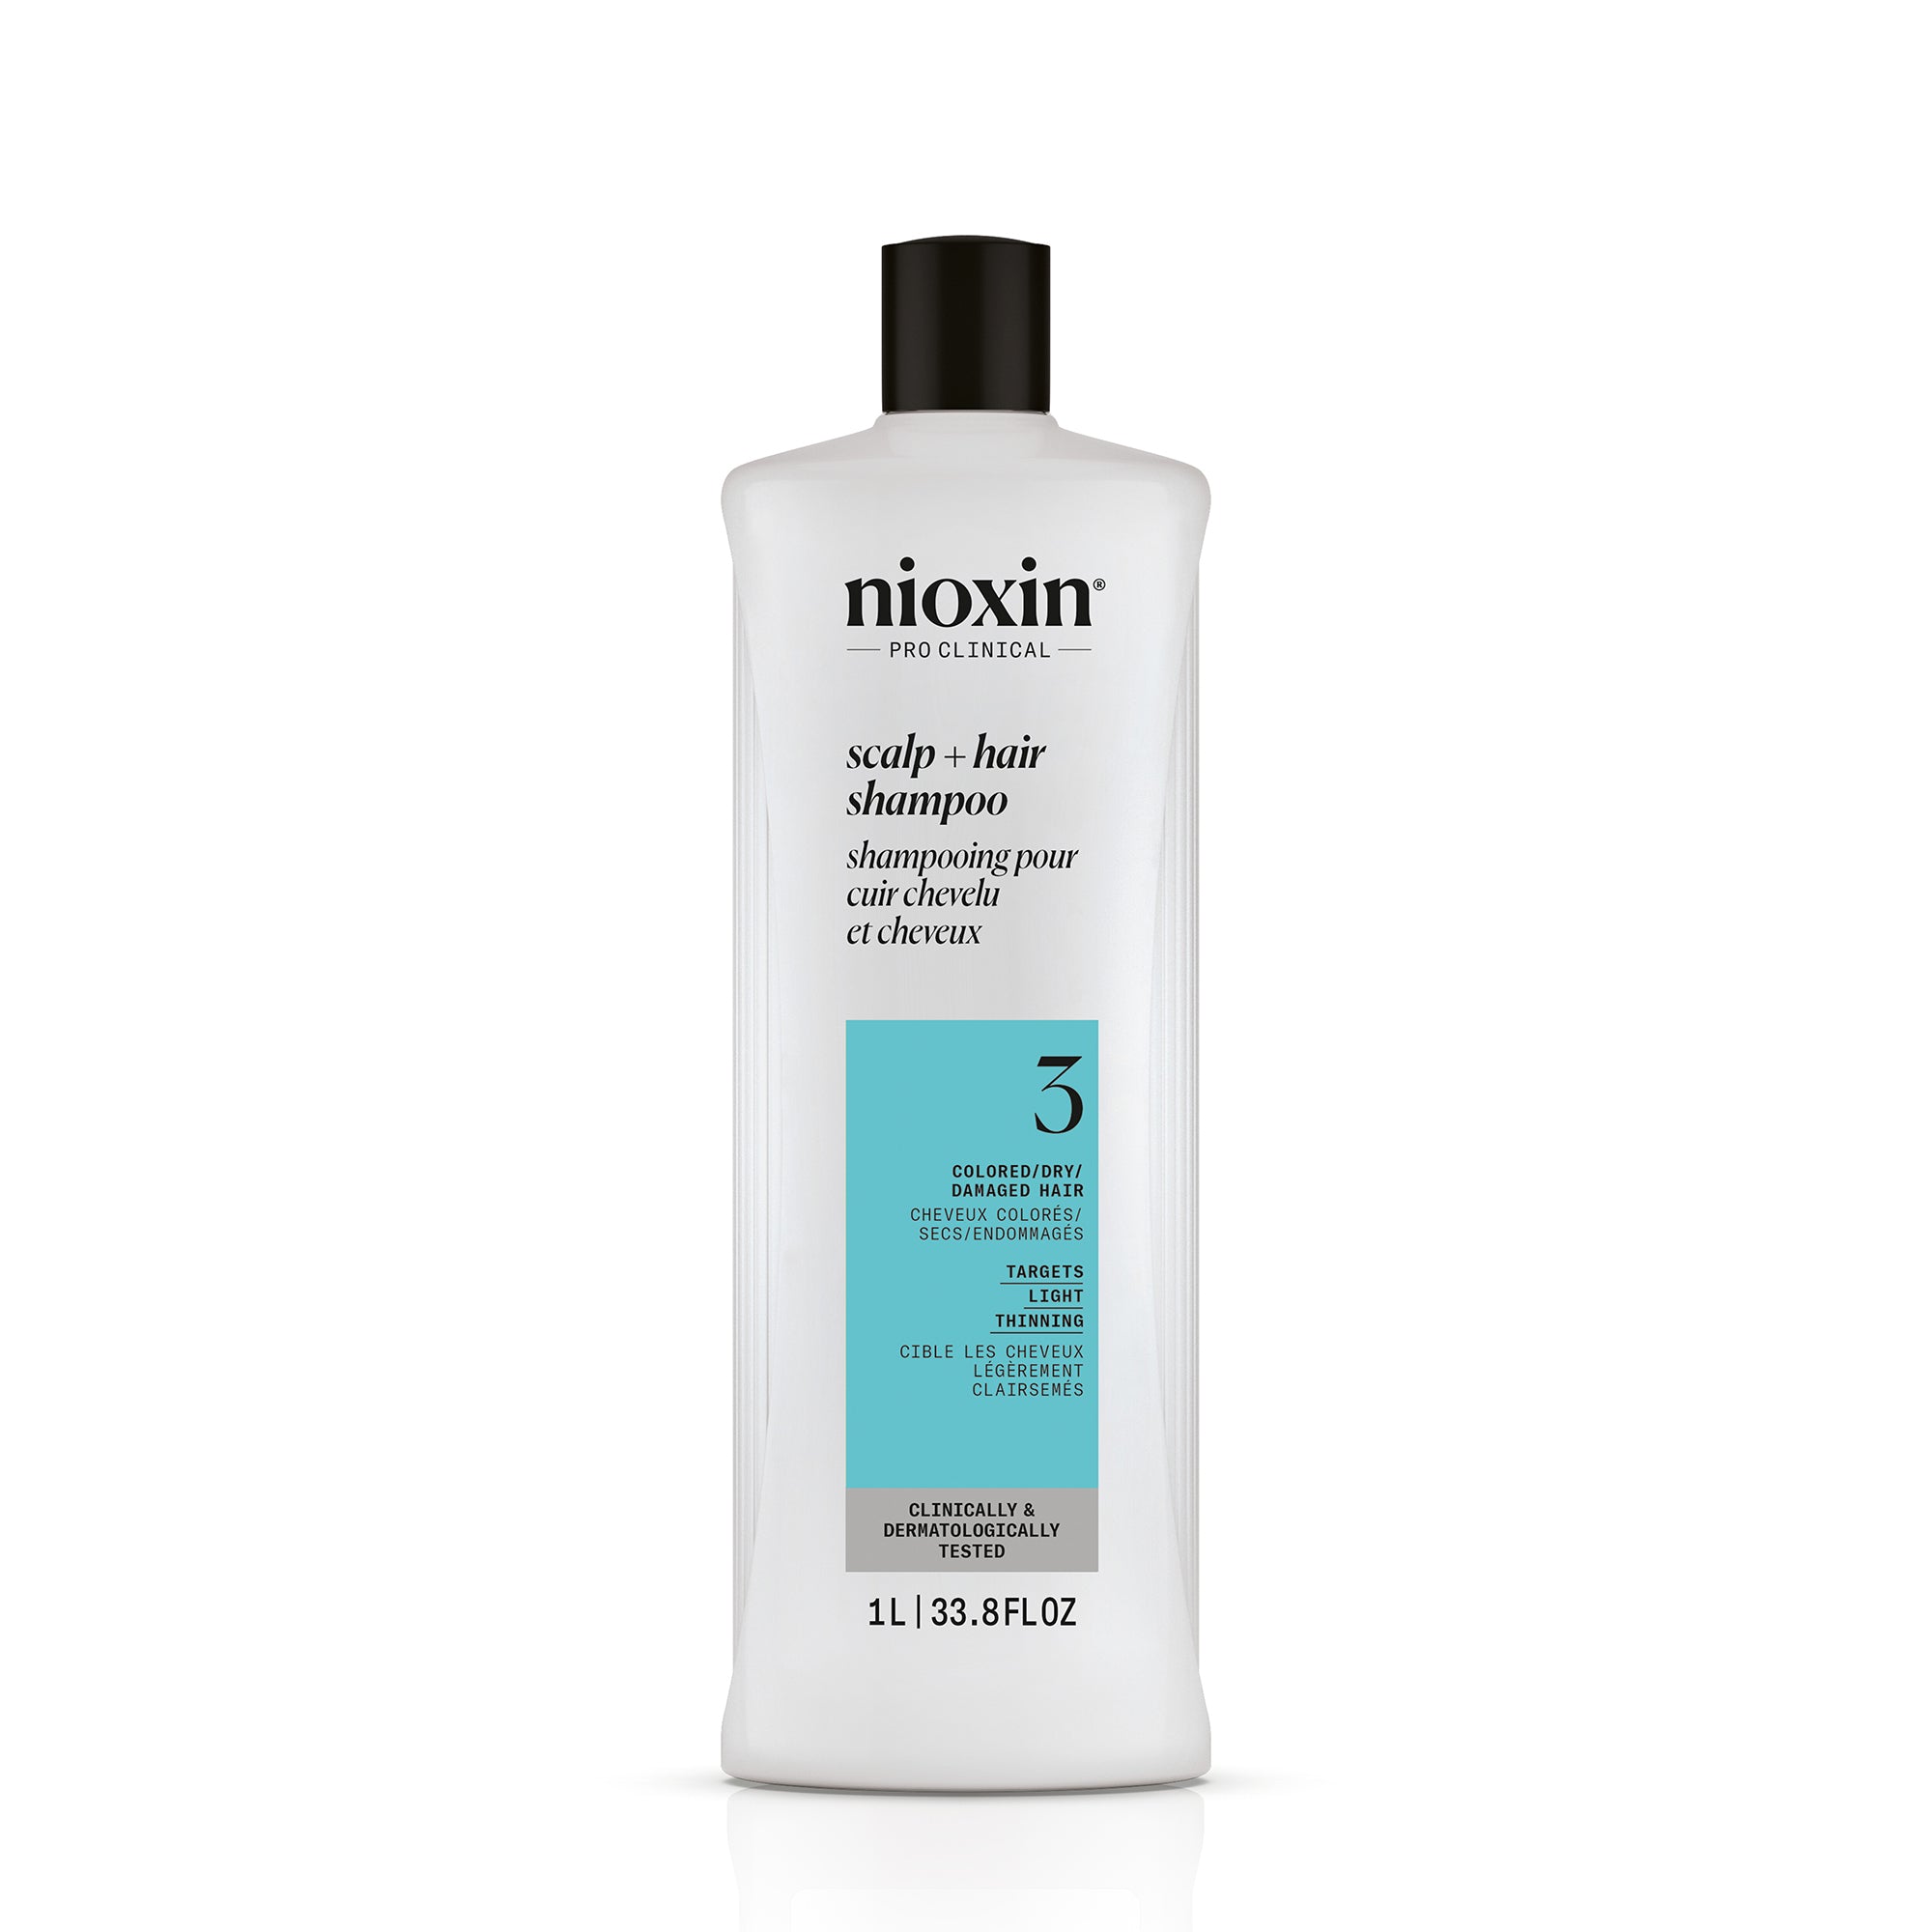 Nioxin System 3 Scalp + Hair Shampoo and Conditioner Liter Duo ($104 Value) / 33.8OZ